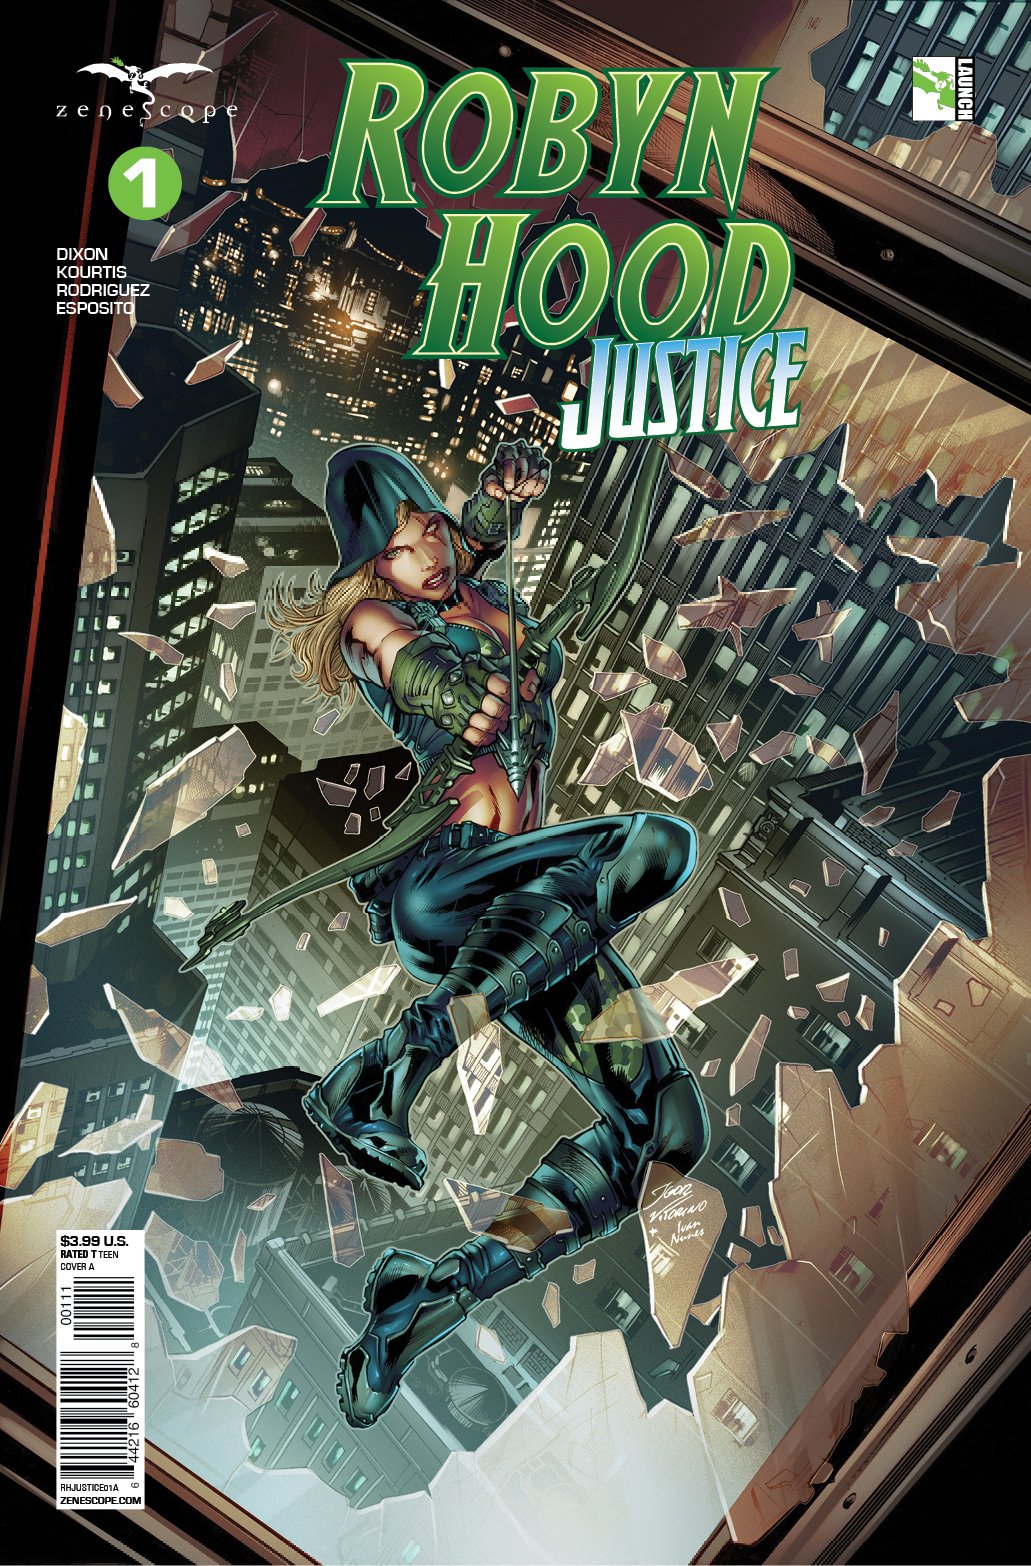 Image of Robyn Hood: Justice #1